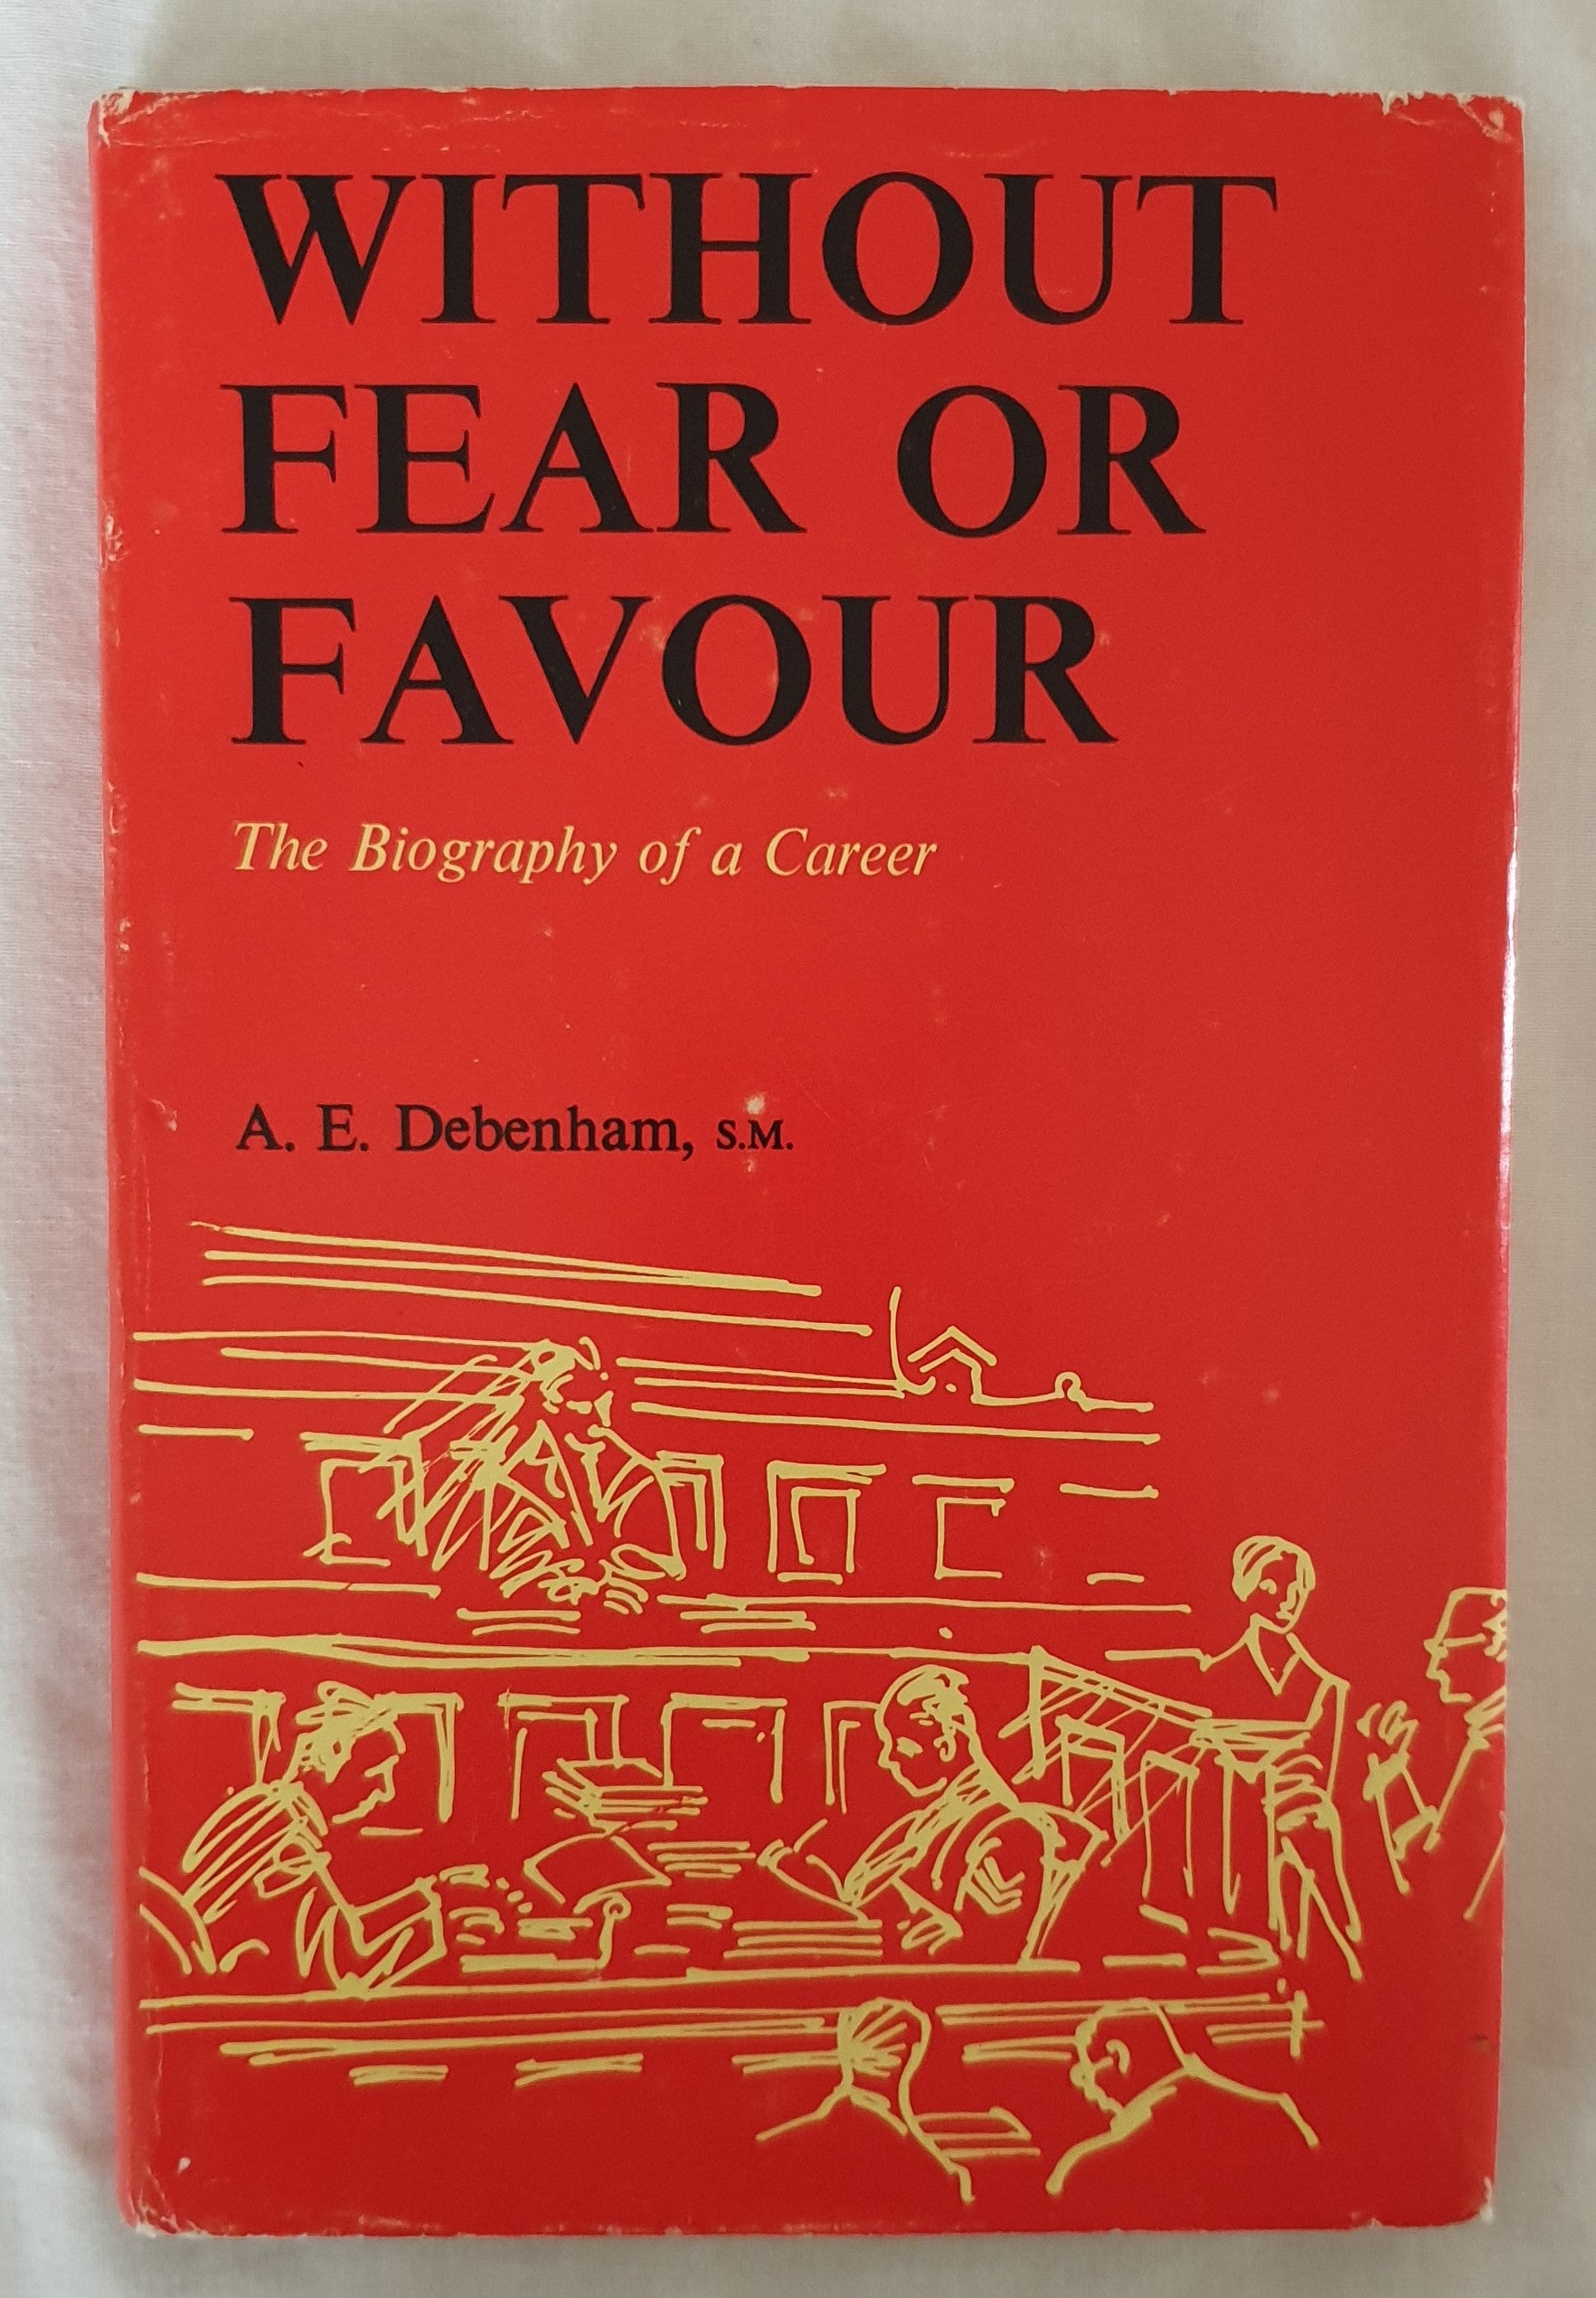 Without Fear or Favour  The Biography of a Career  by A. E. Debenham